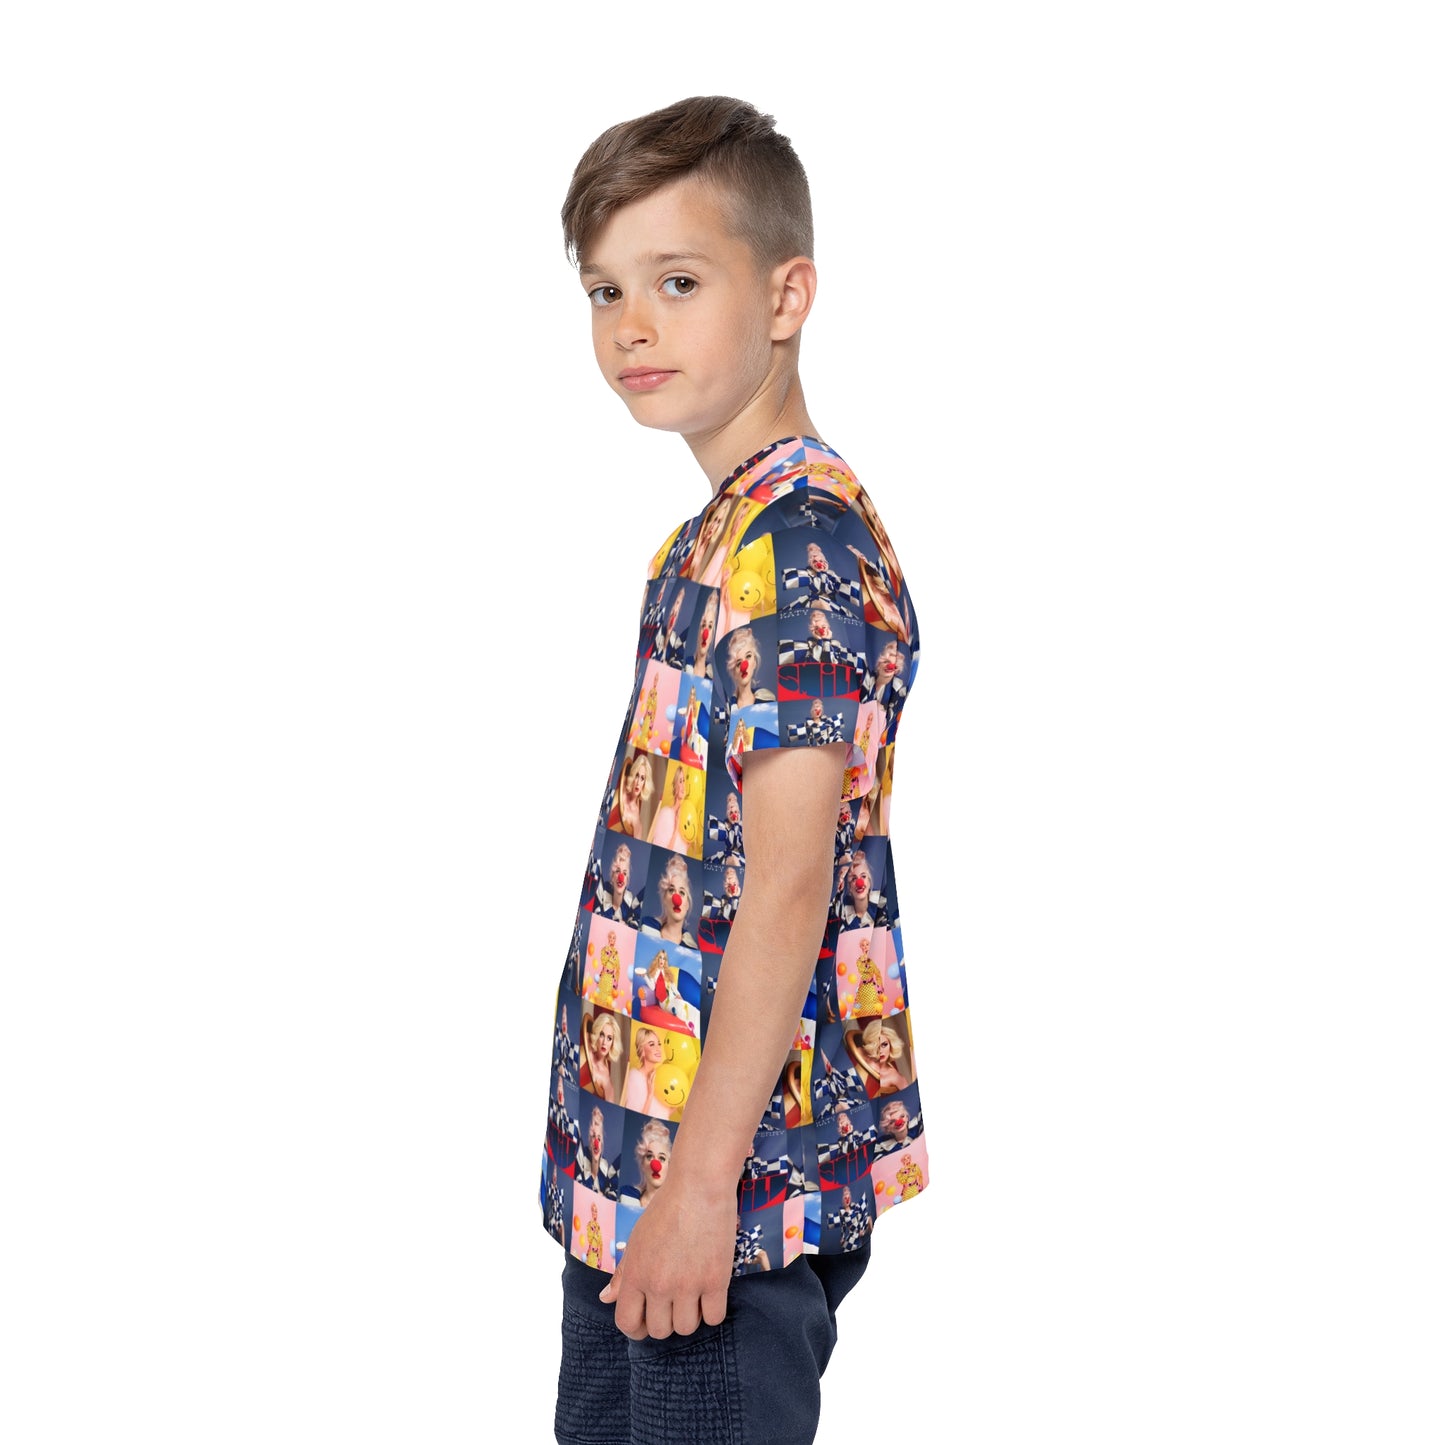 Katy Perry Smile Mosaic Kids Sports Jersey